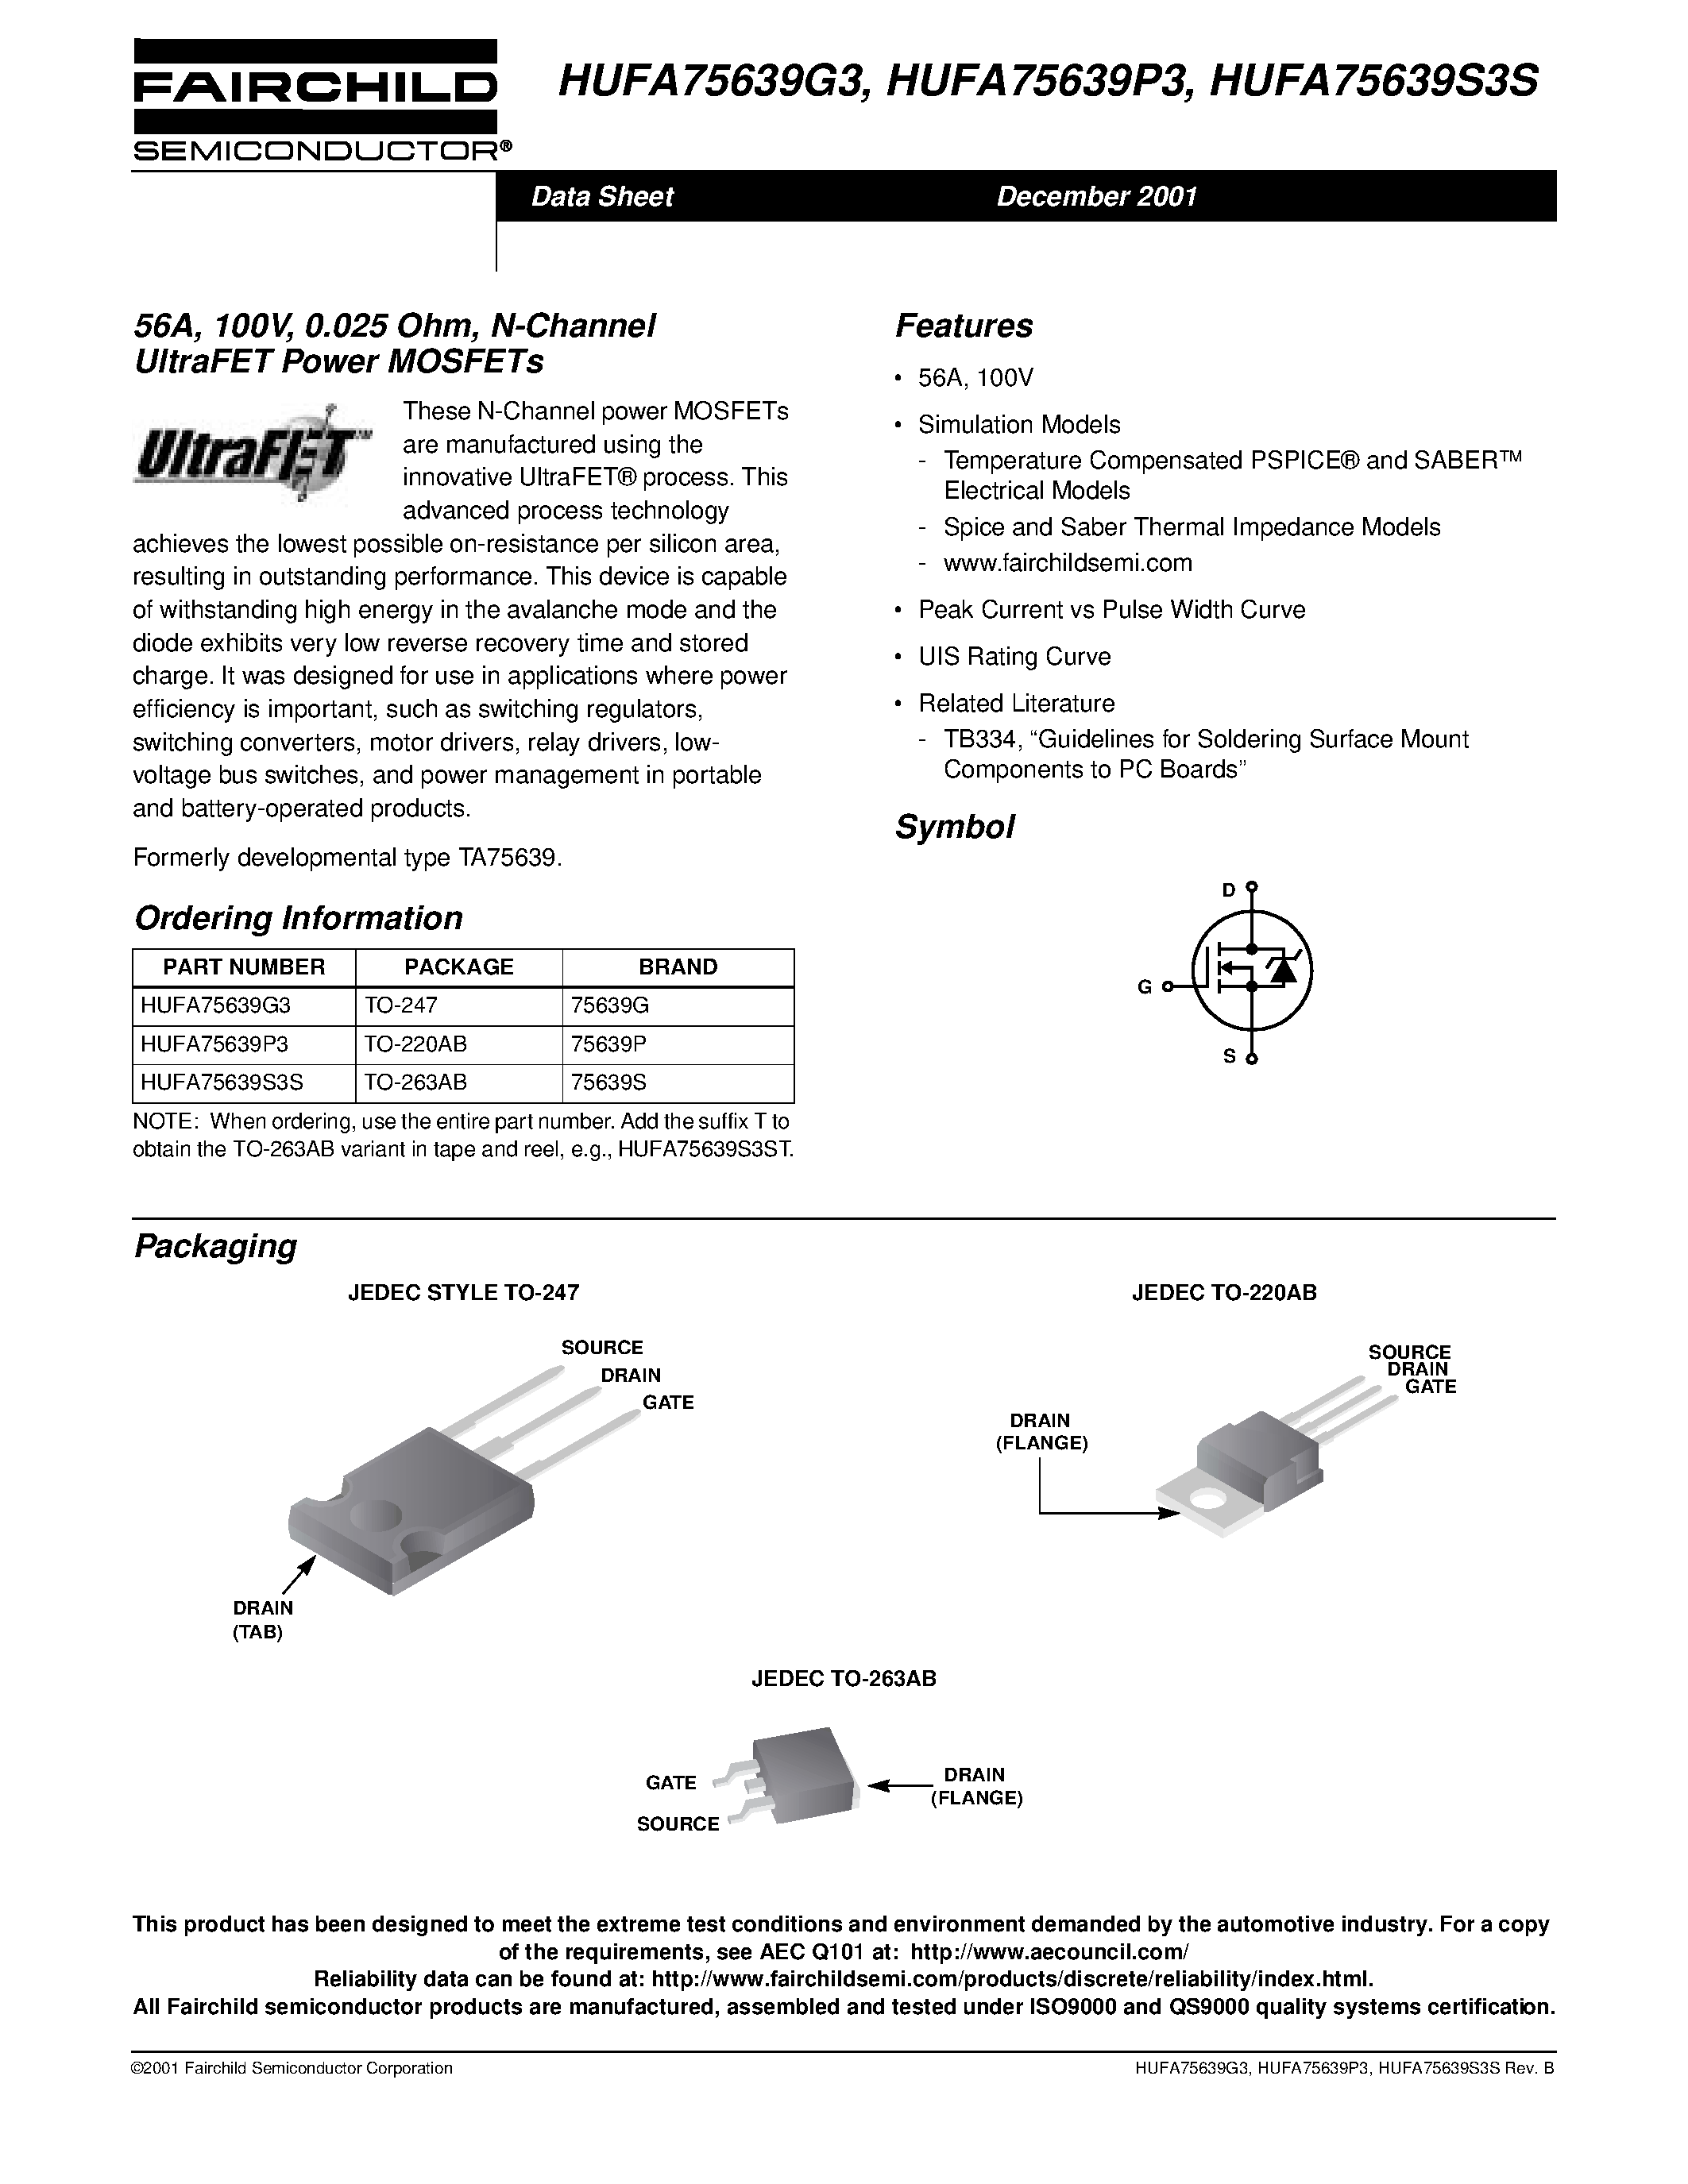 Datasheet HUFA75639P3 - 56A/ 100V/ 0.025 Ohm/ N-Channel UltraFET Power MOSFETs page 1